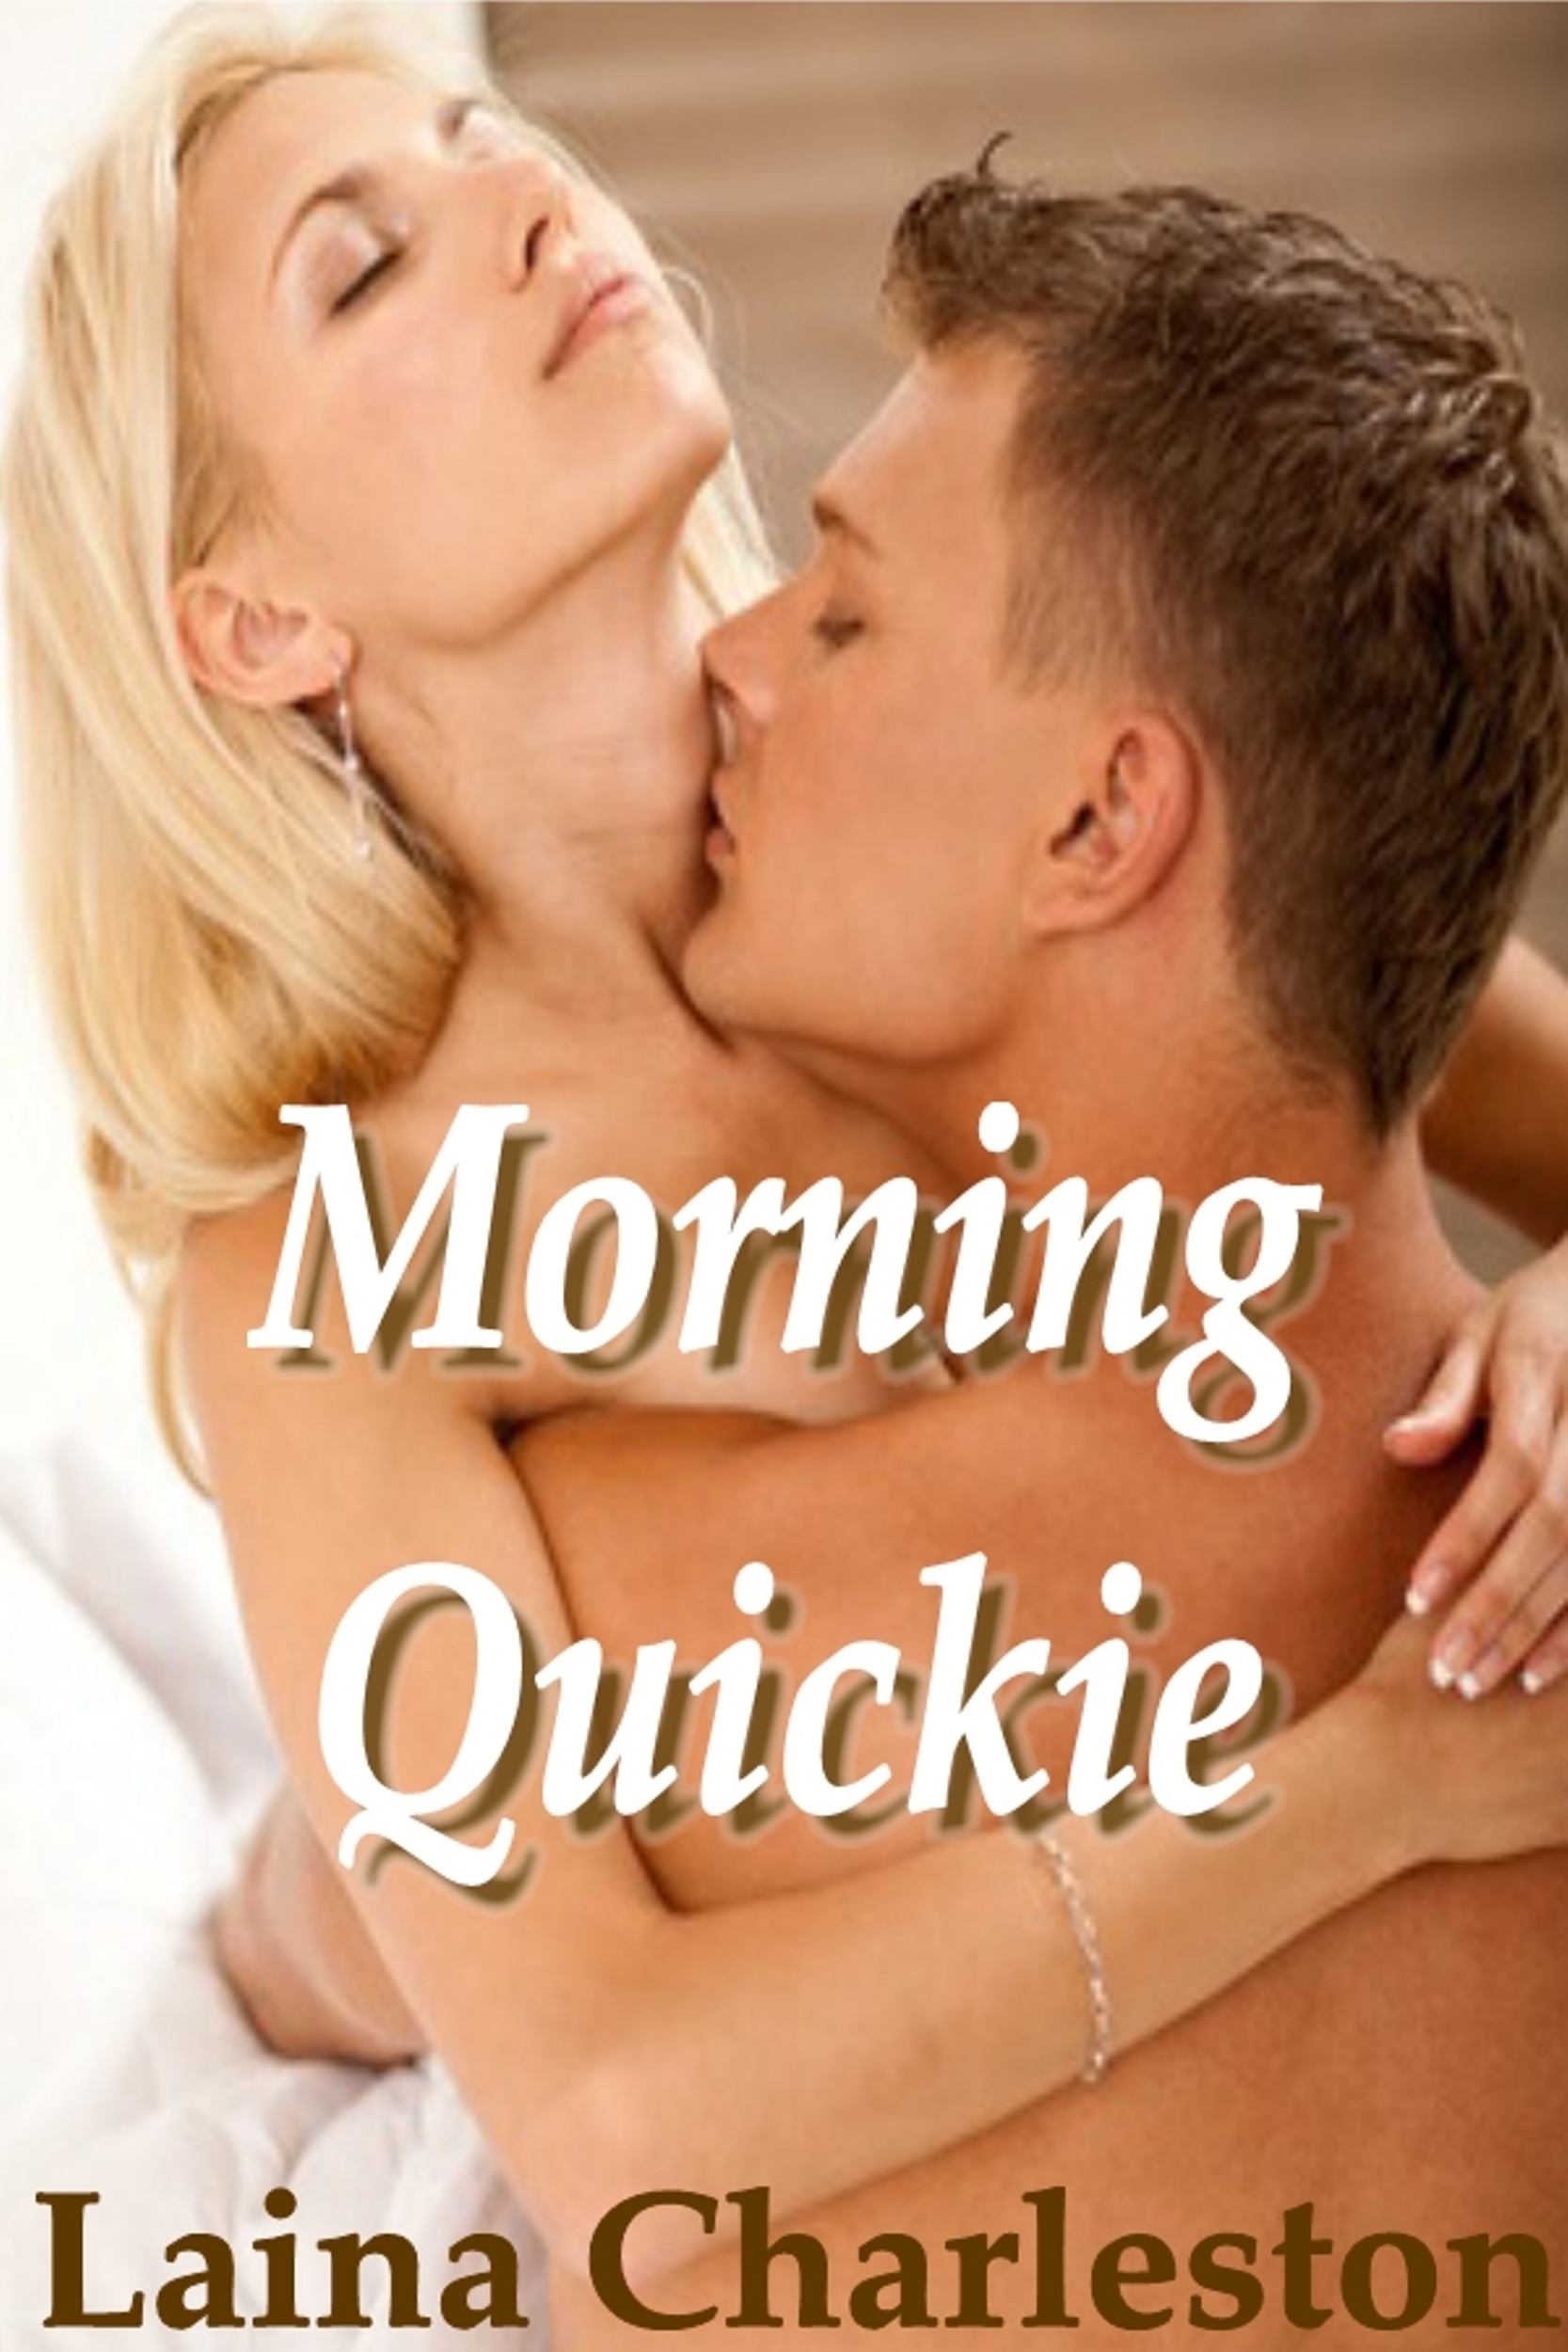 barbara caporusso recommends Quickie In The Morning